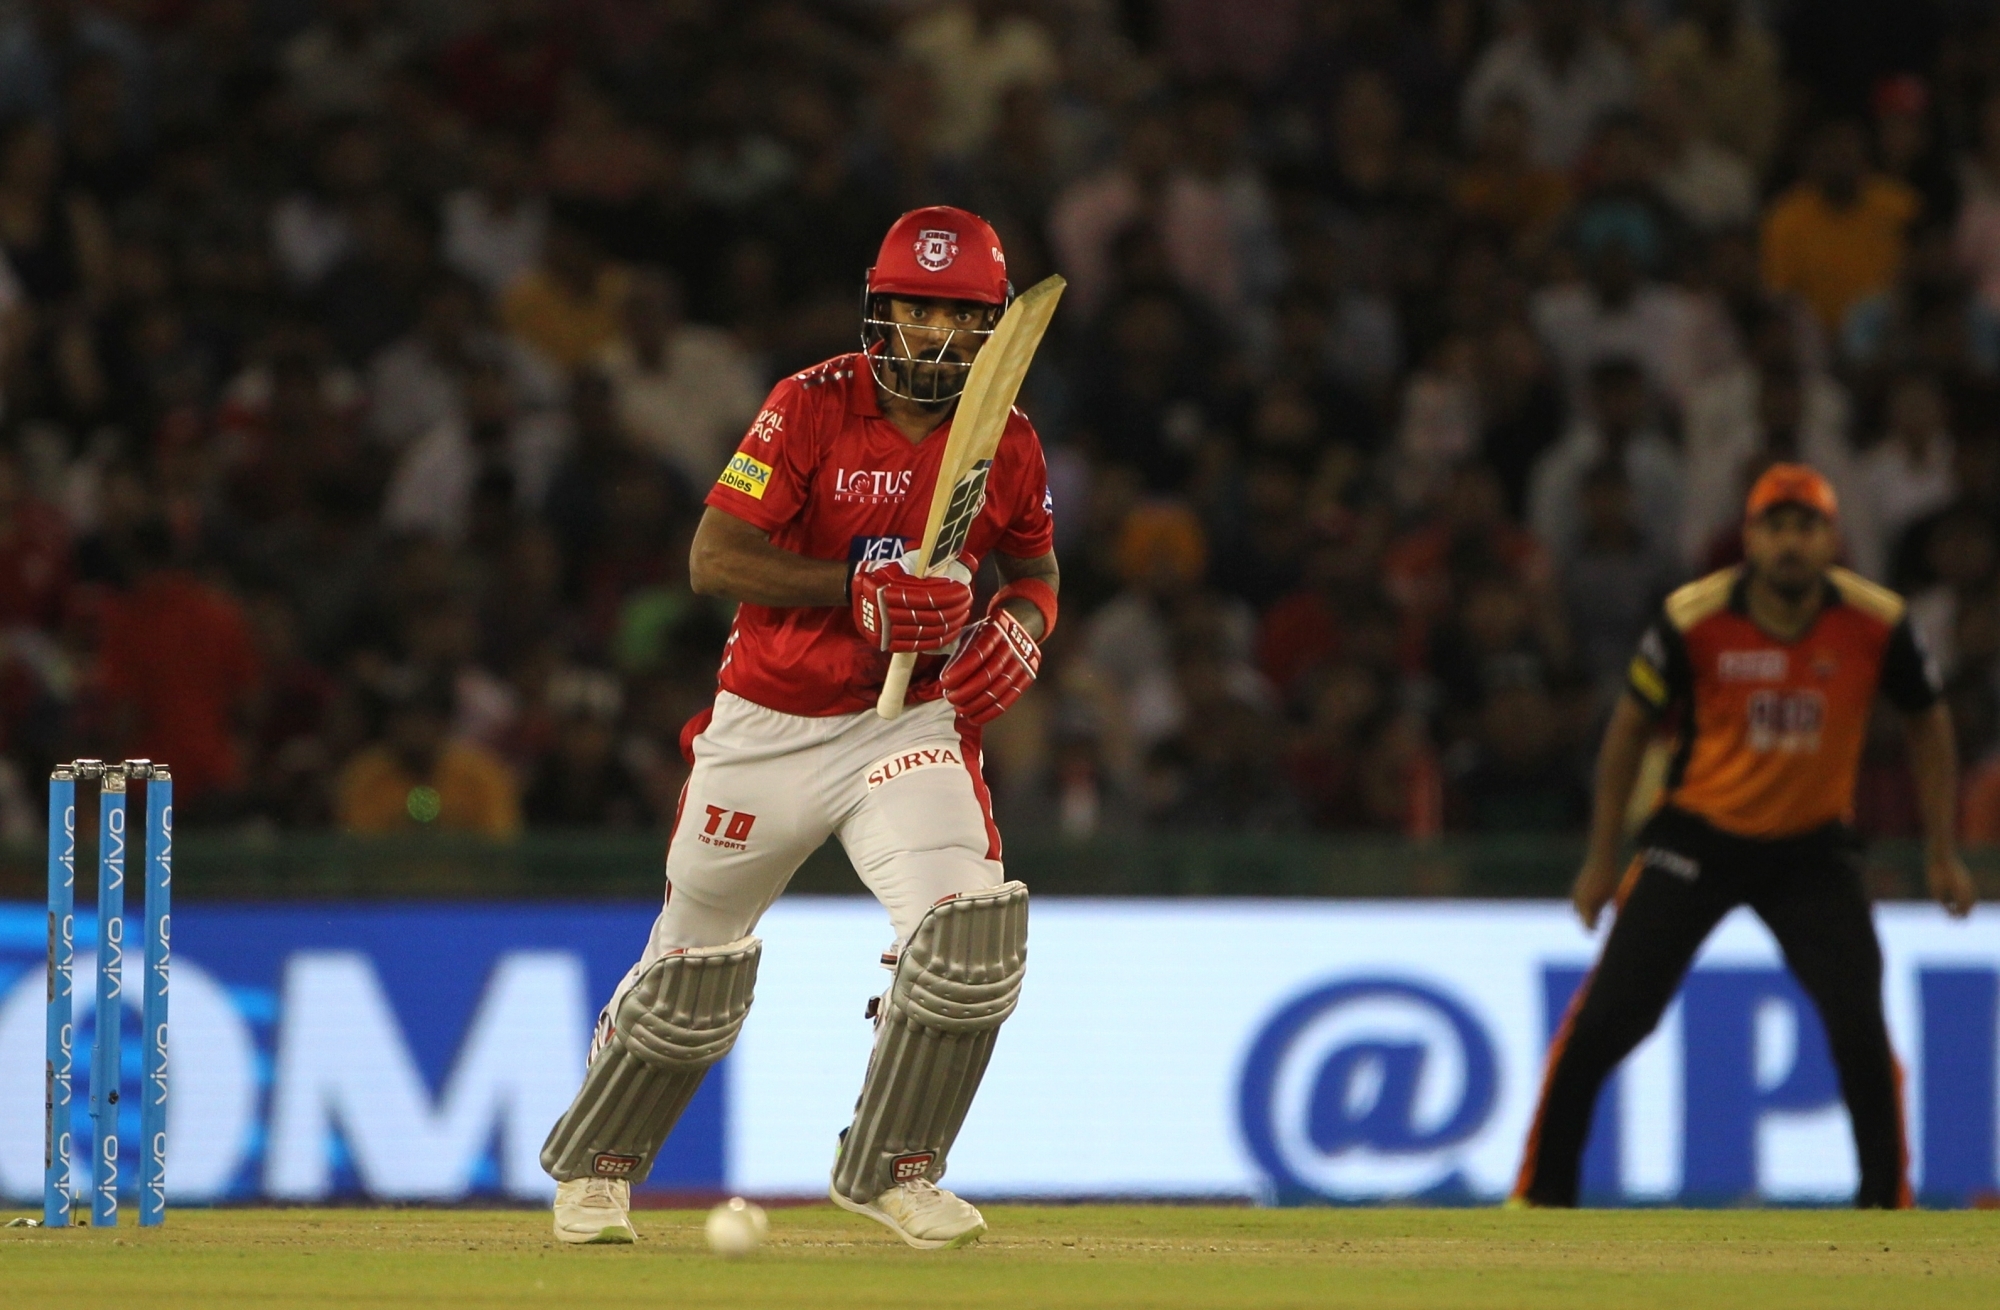 KL Rahul has scored fifties in three of the last four matches in this IPL (photo - IANS)